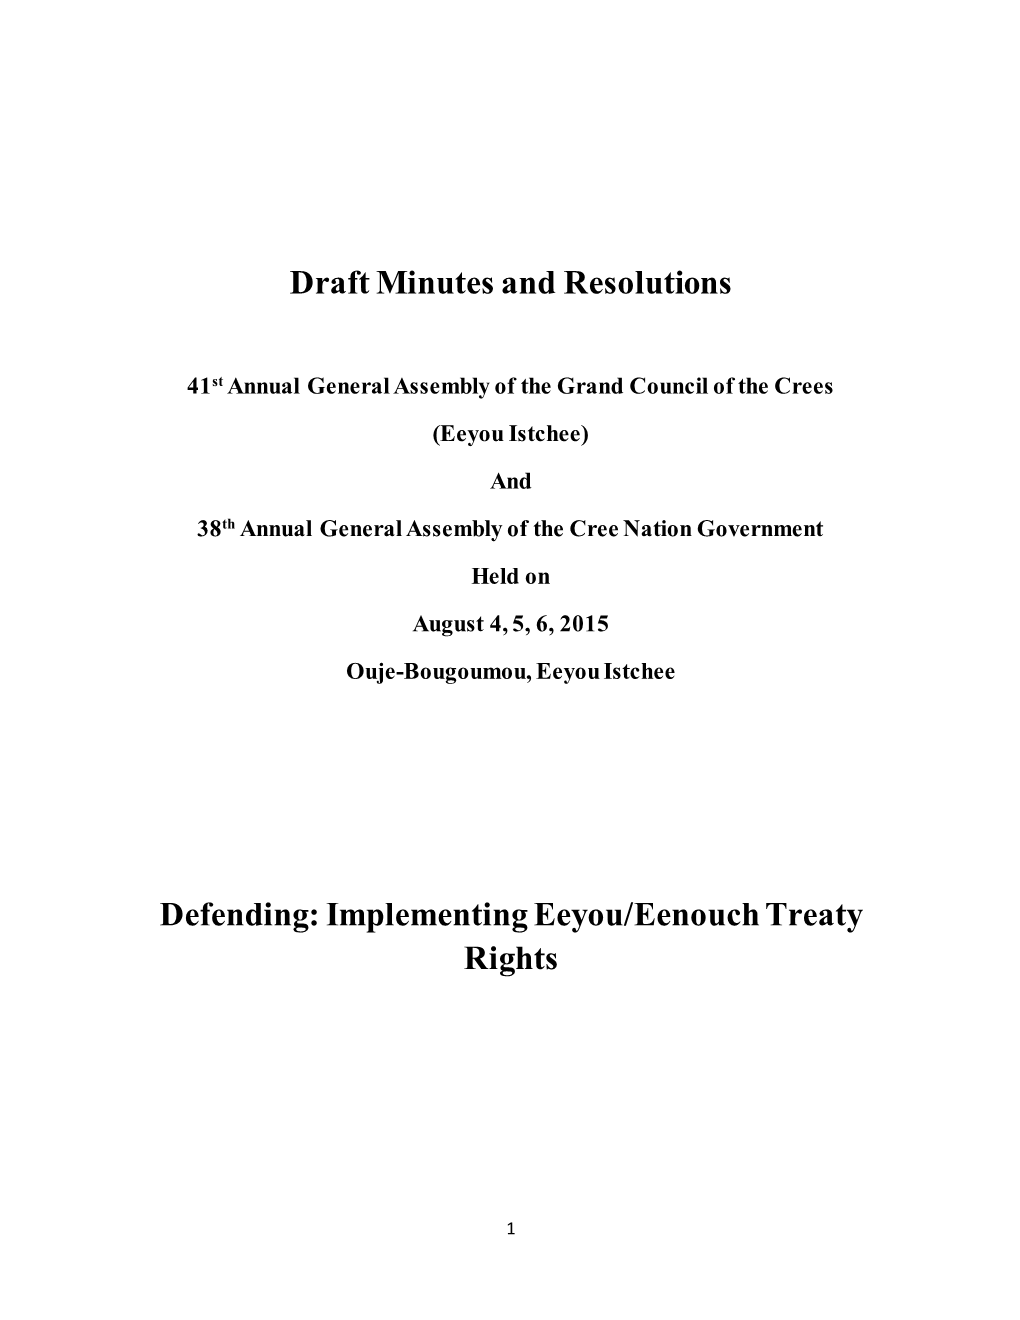 Draft Minutes and Resolutions Defending: Implementing Eeyou